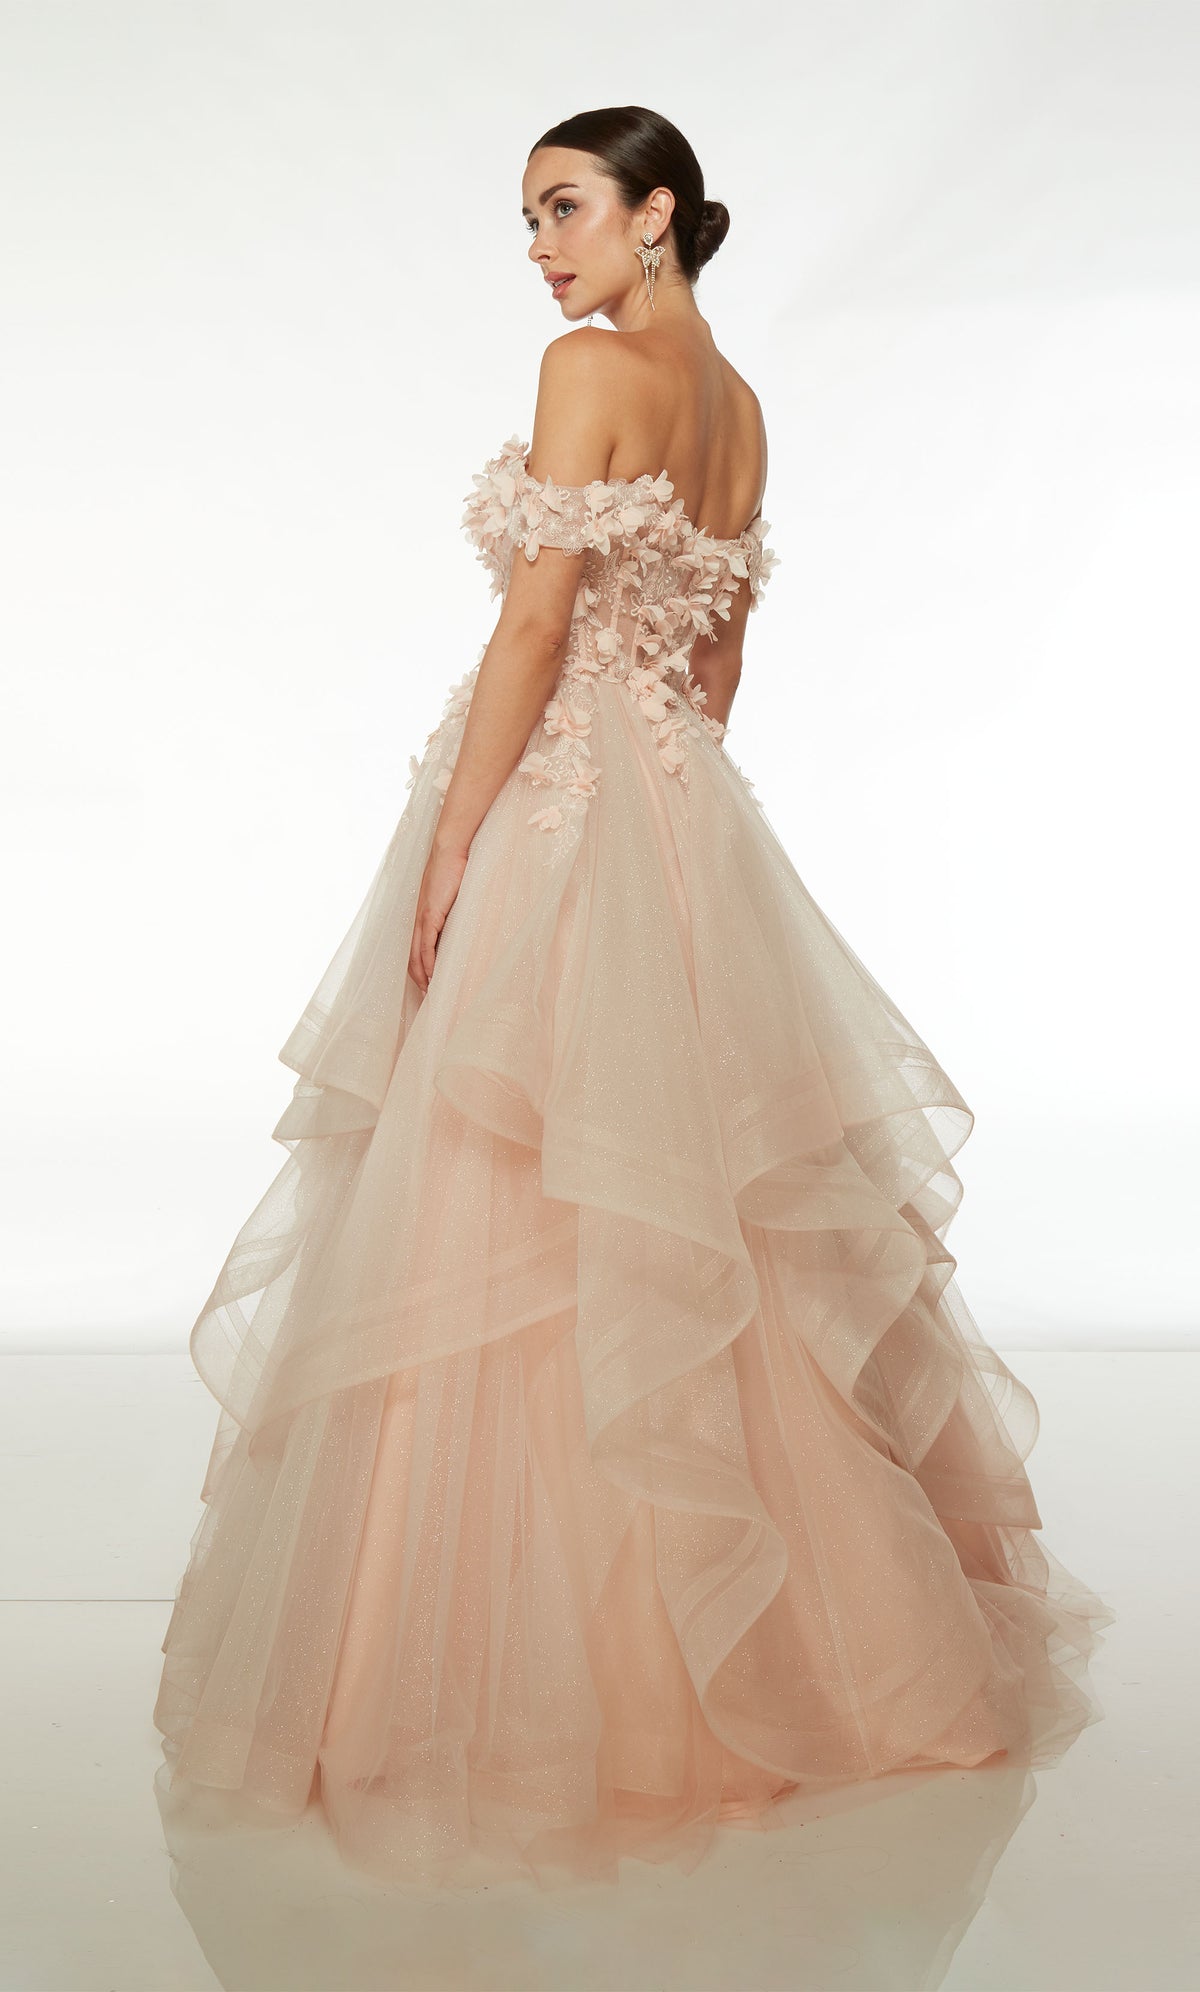 Pink glitter tulle off-the-shoulder corset ball gown with detachable sleeves, sheer 3D flower embellished bodice, and an ruffled tulle skirt for an whimsical vibe.